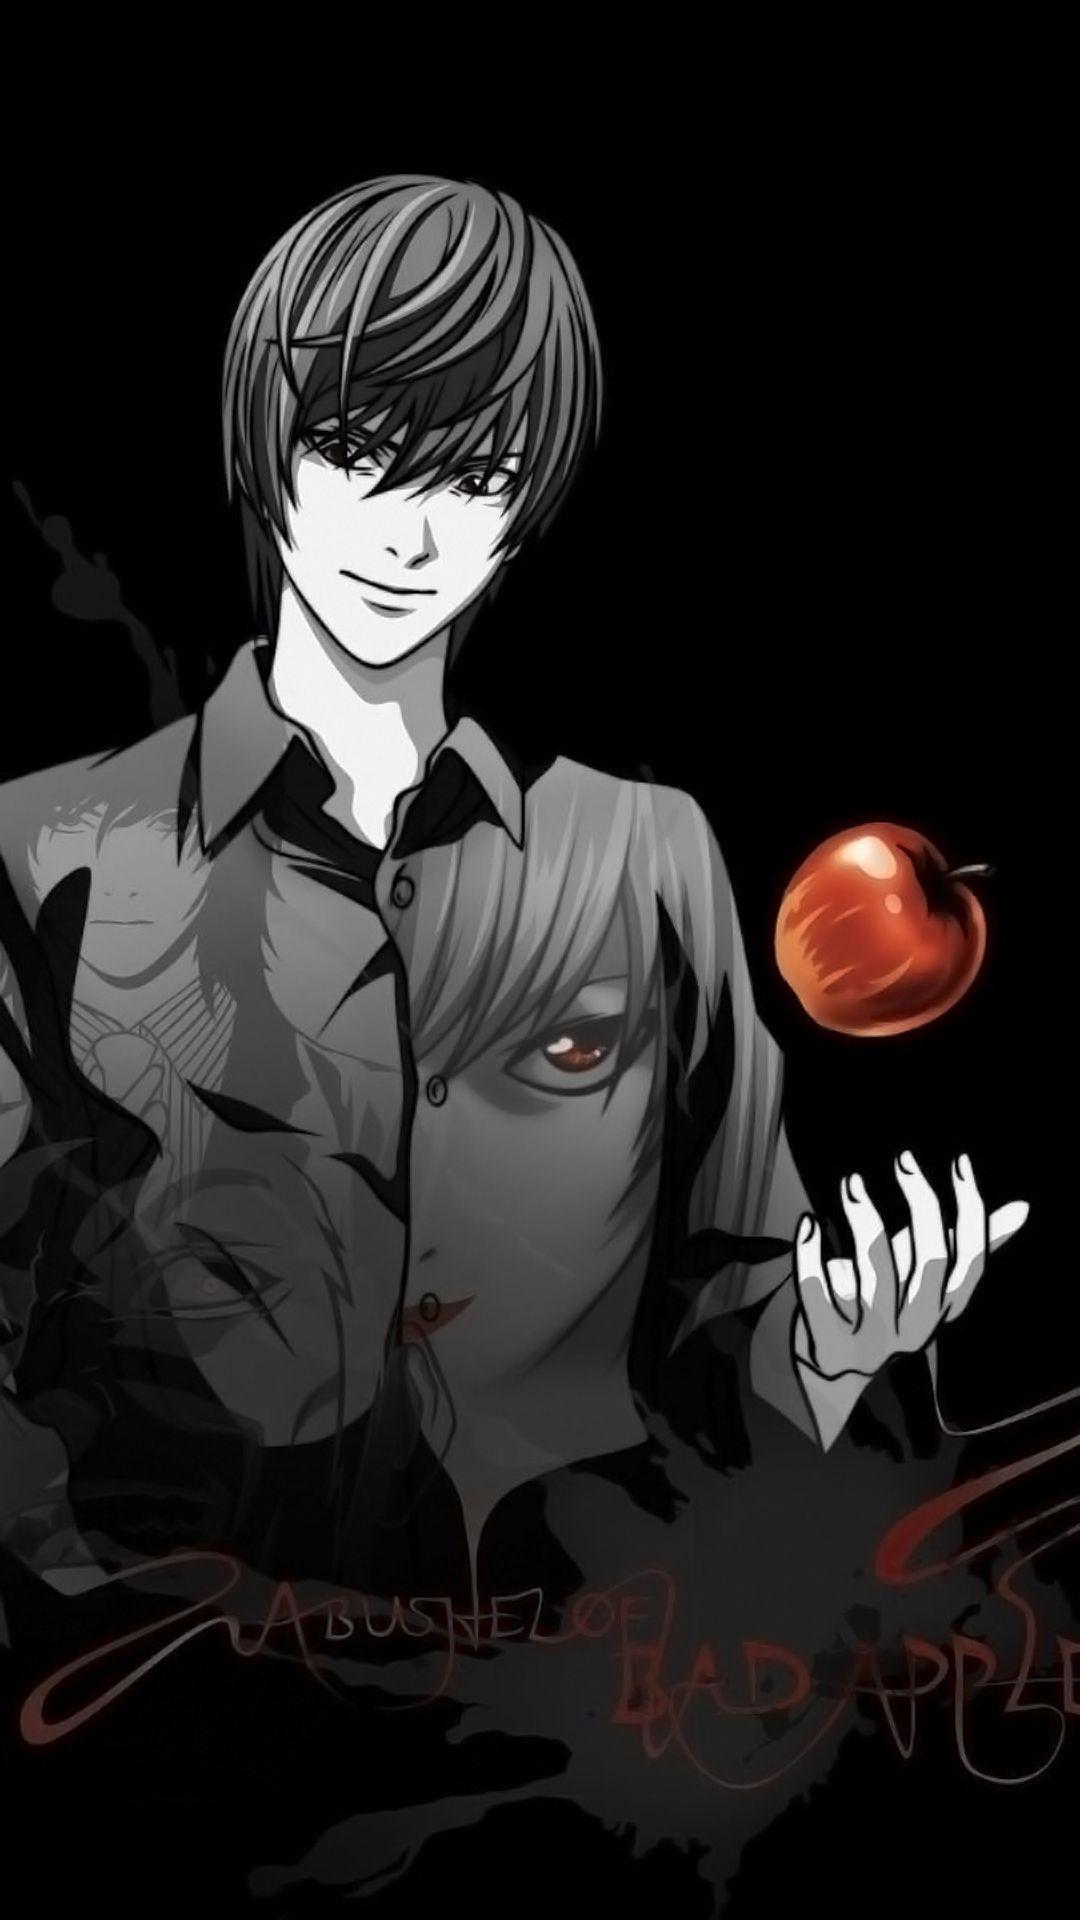 Light death note Samsung wallpaper. Android. Death